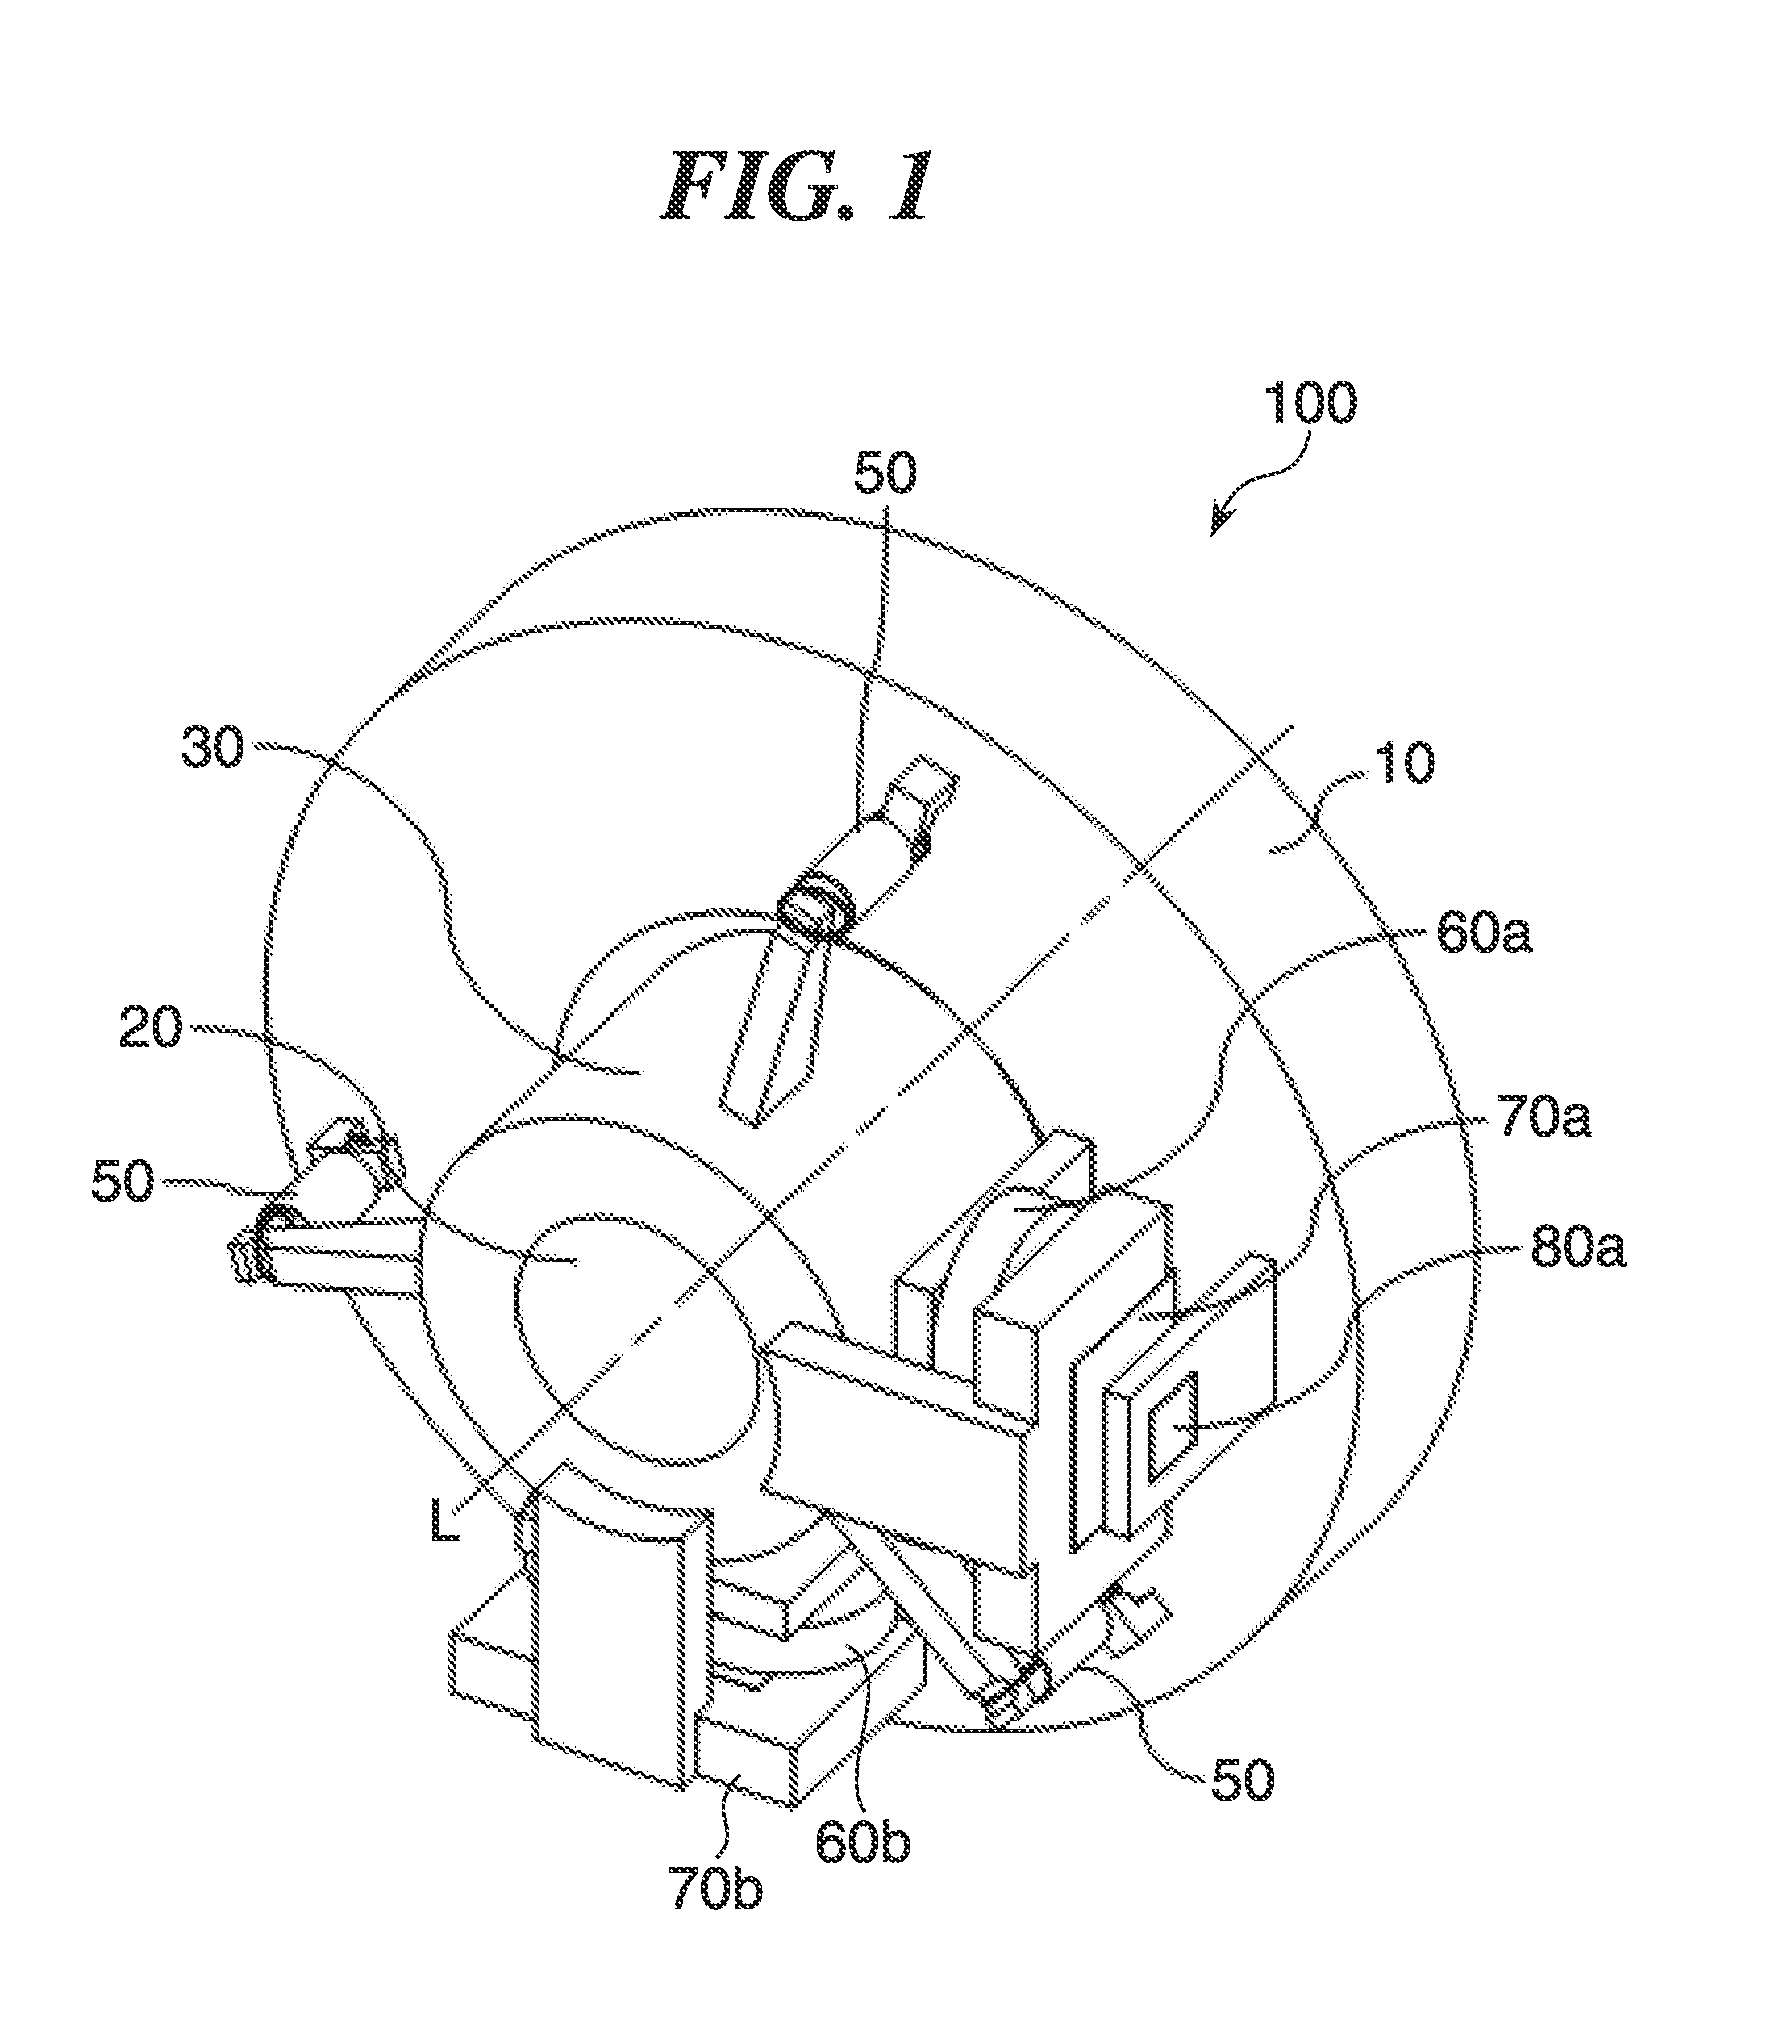 Image stabilization apparatus that reduces blurring of subject image and optical device